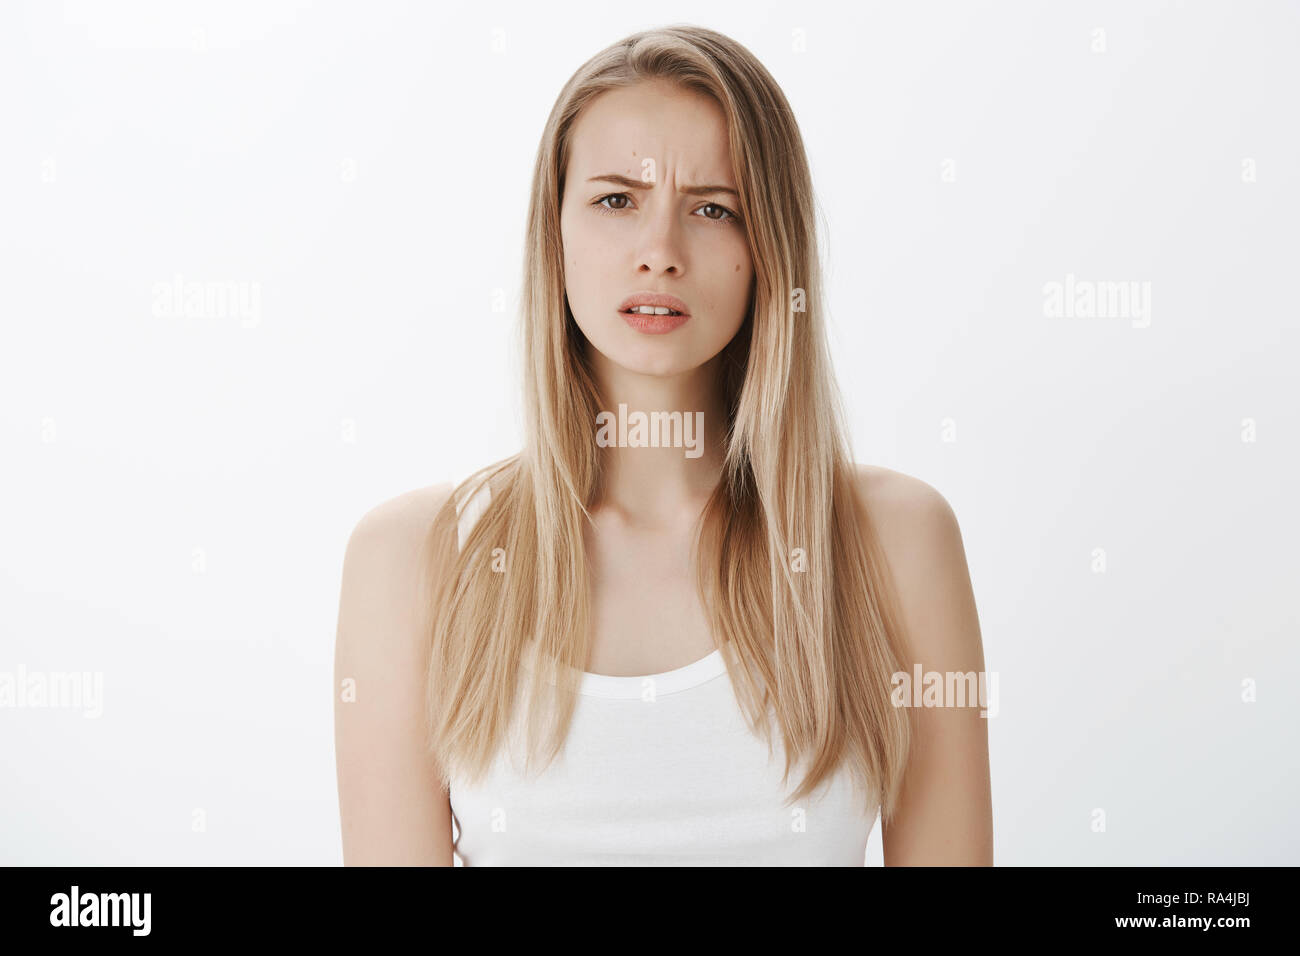 Portrait of confused puzzled attractive european female model with blond hair frowning and squinting as cannot get clue, standing questioned and clueless against gray background Stock Photo